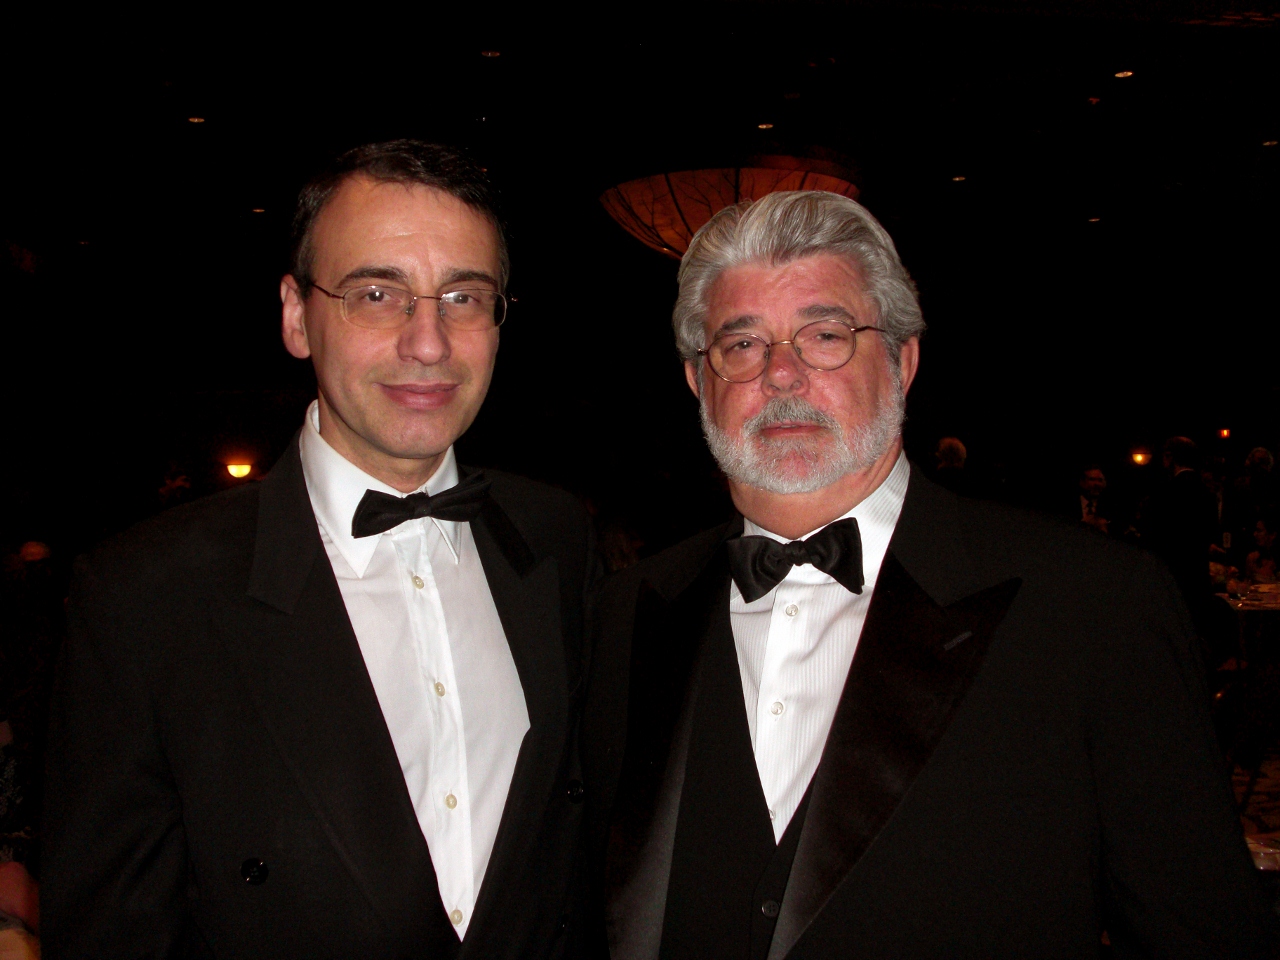 MPSE VP Frank Morrone with George Lucas at the 2009 MPSE Golden Reel Awards